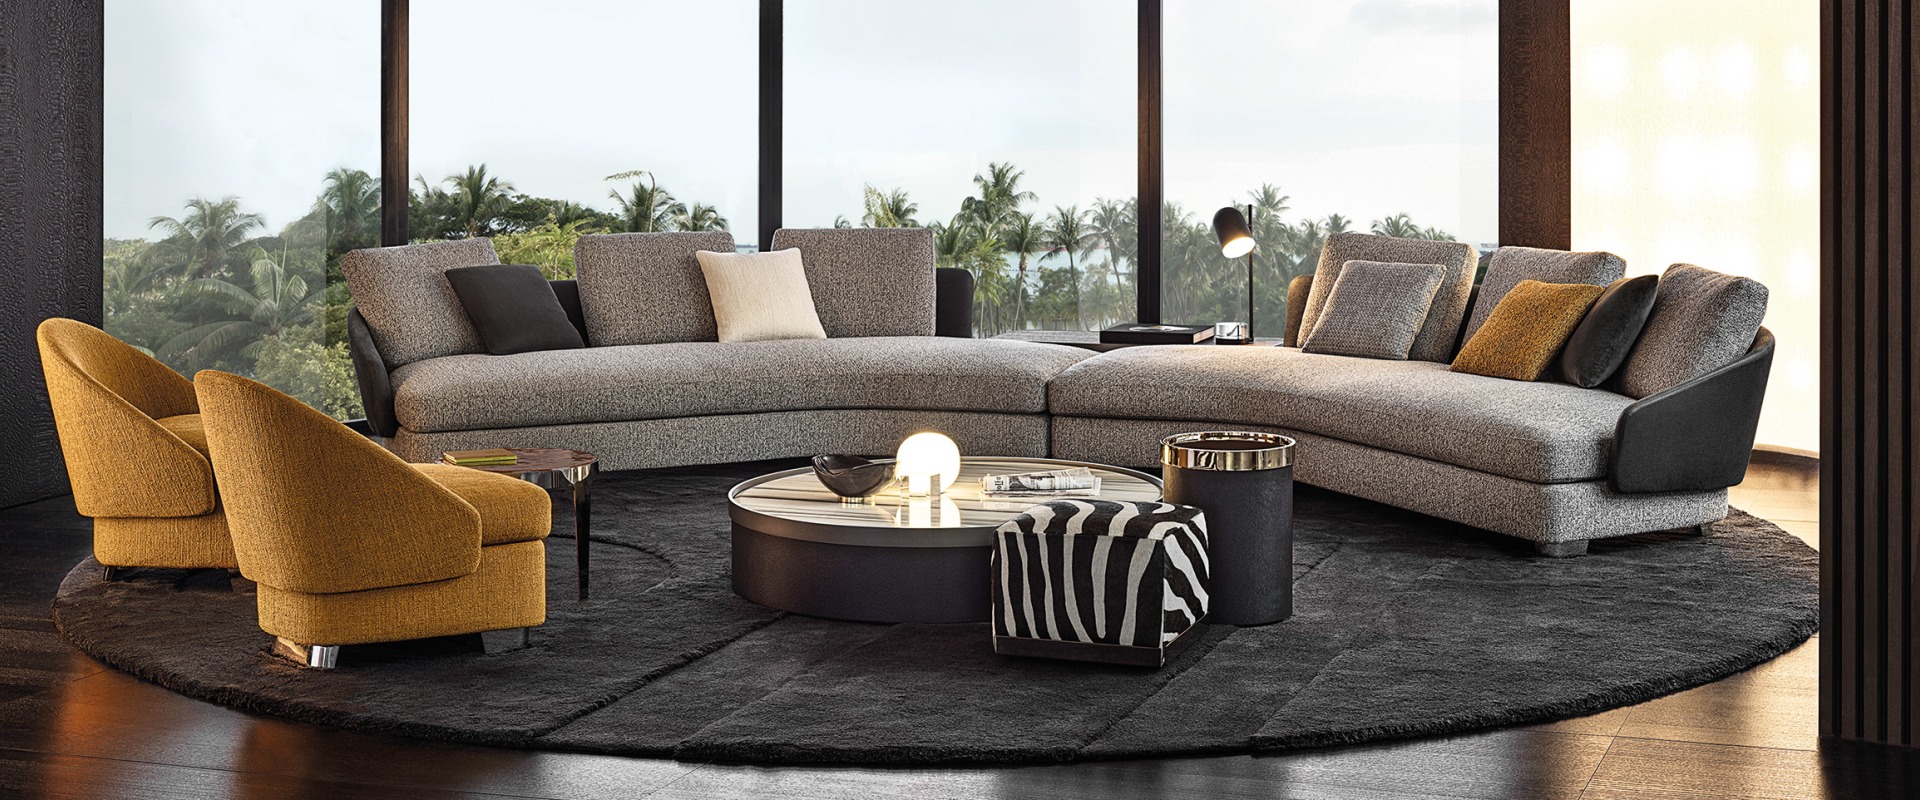 What Makes Minotti Furniture Stand Out in Today's Market?